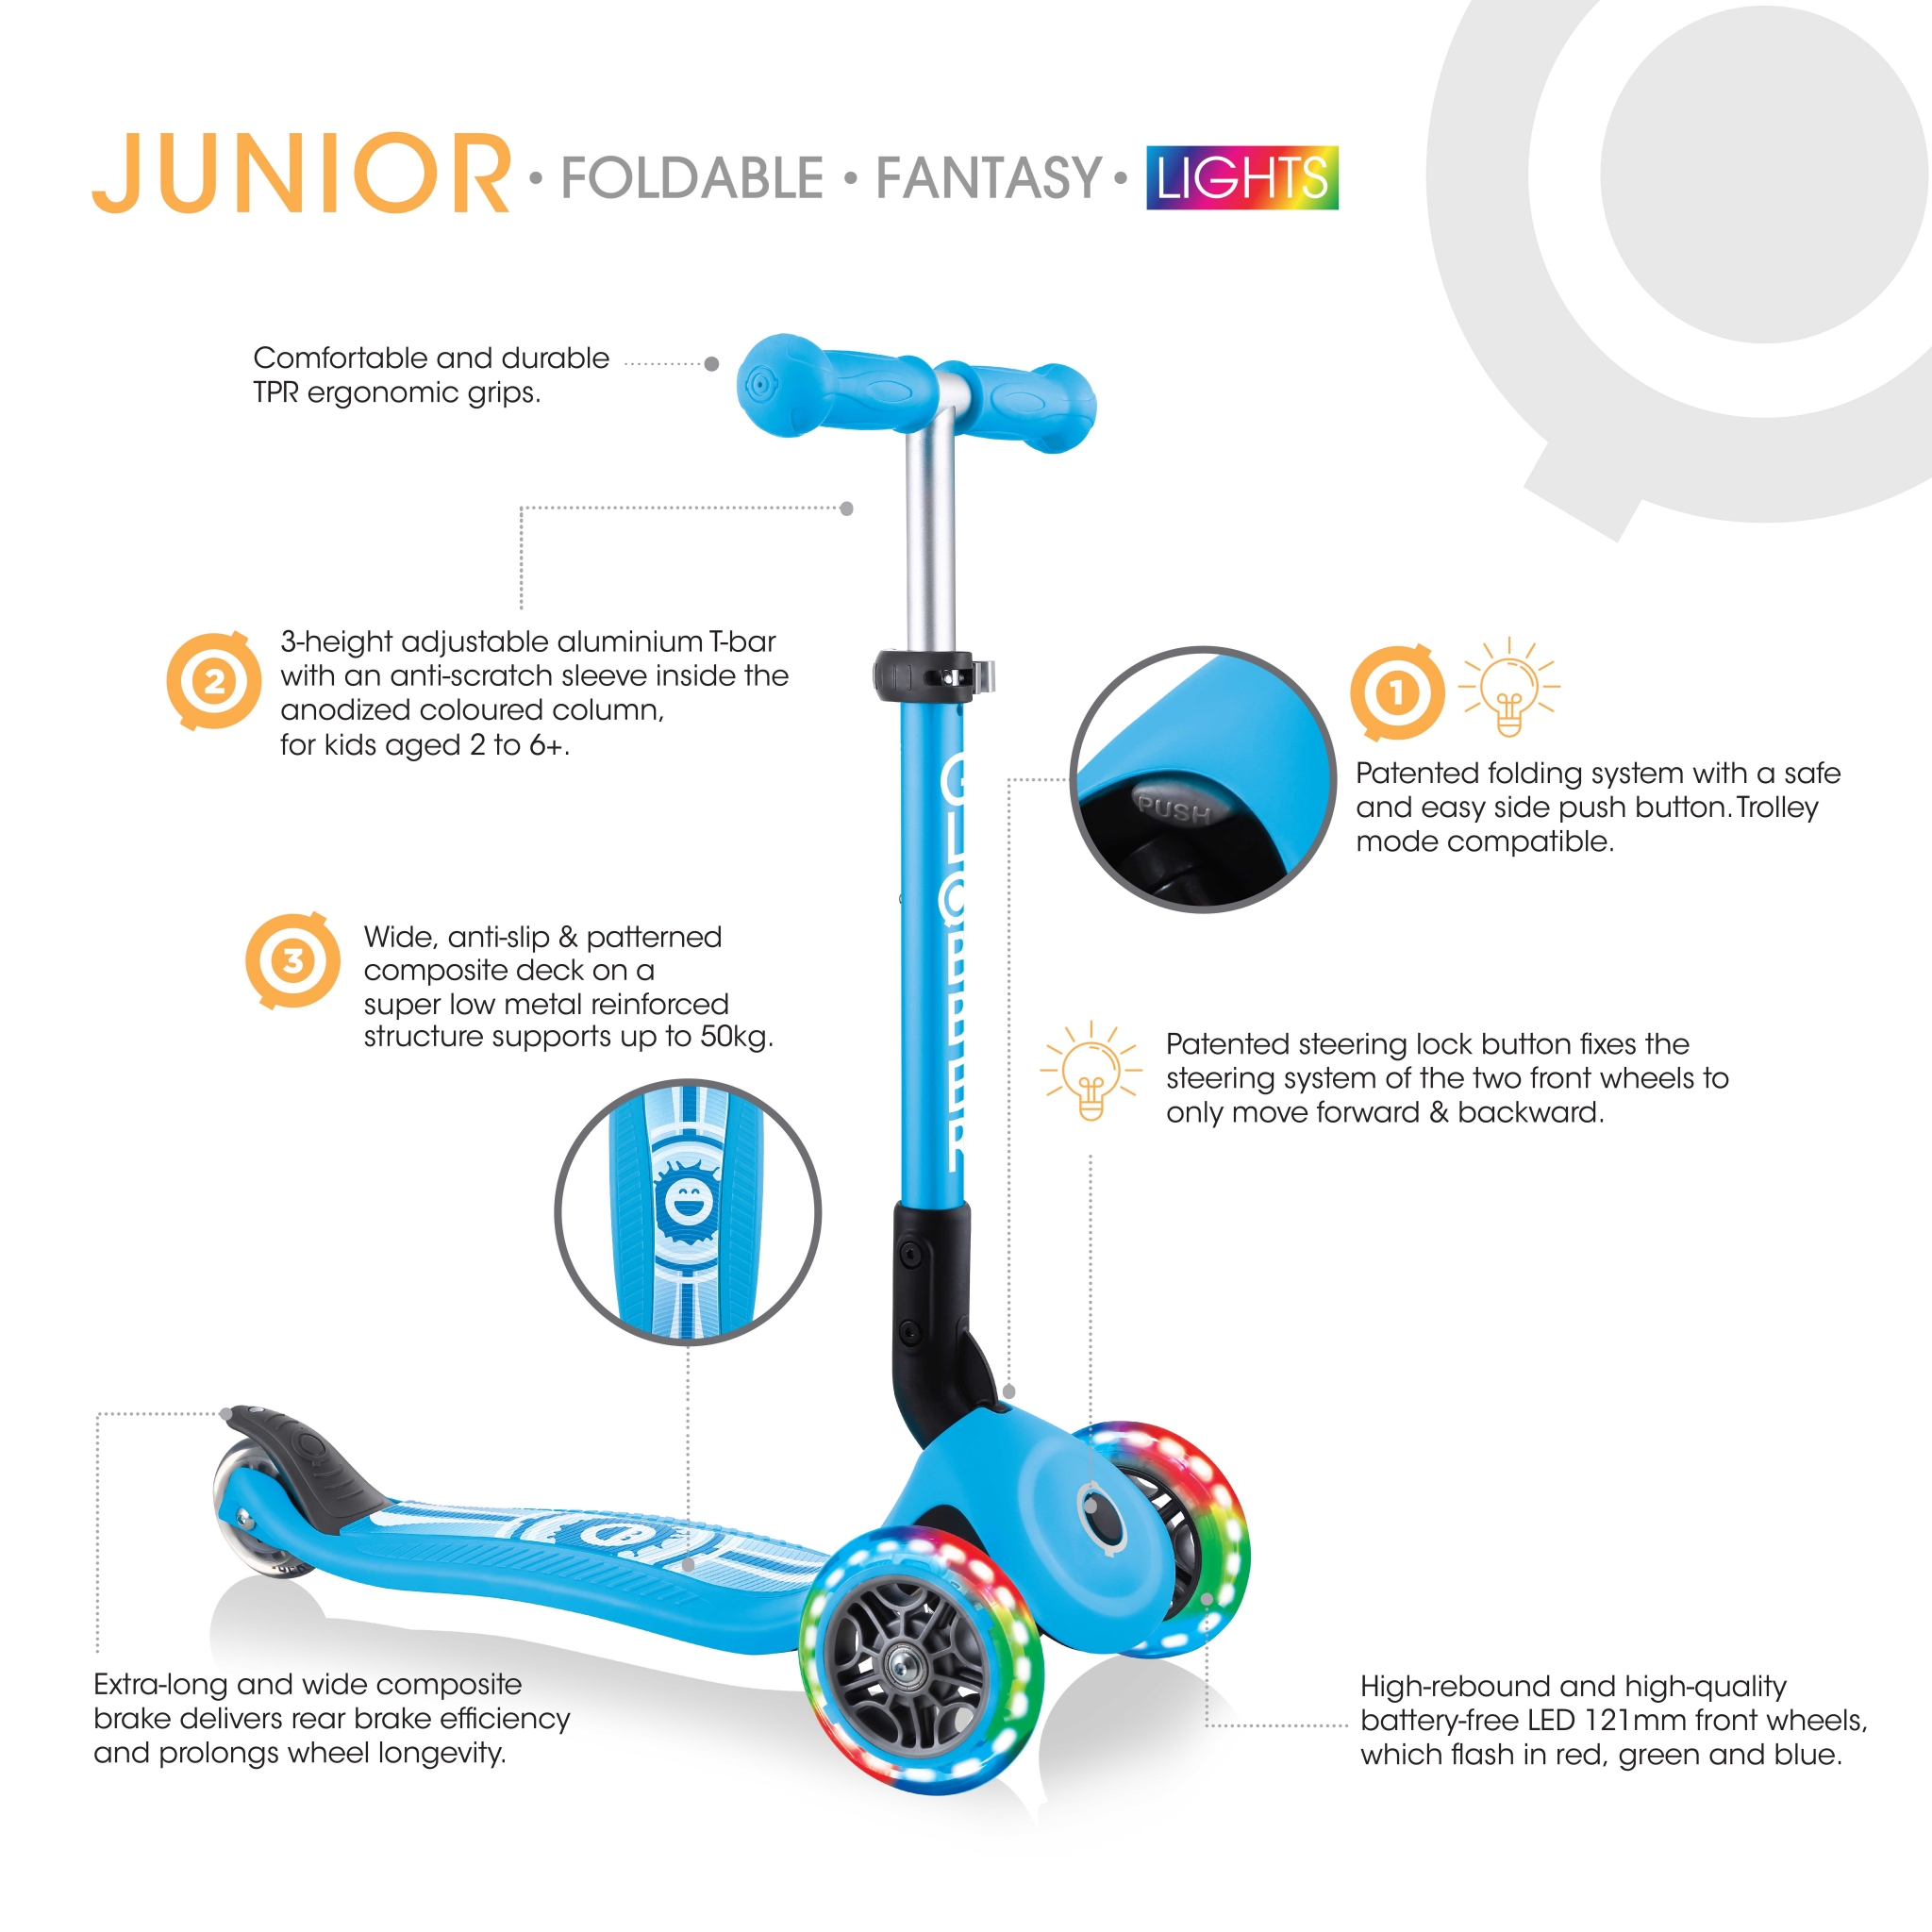 junior-foldable-fantasy-lights-3-wheel-scooter-for-2-year-old 6